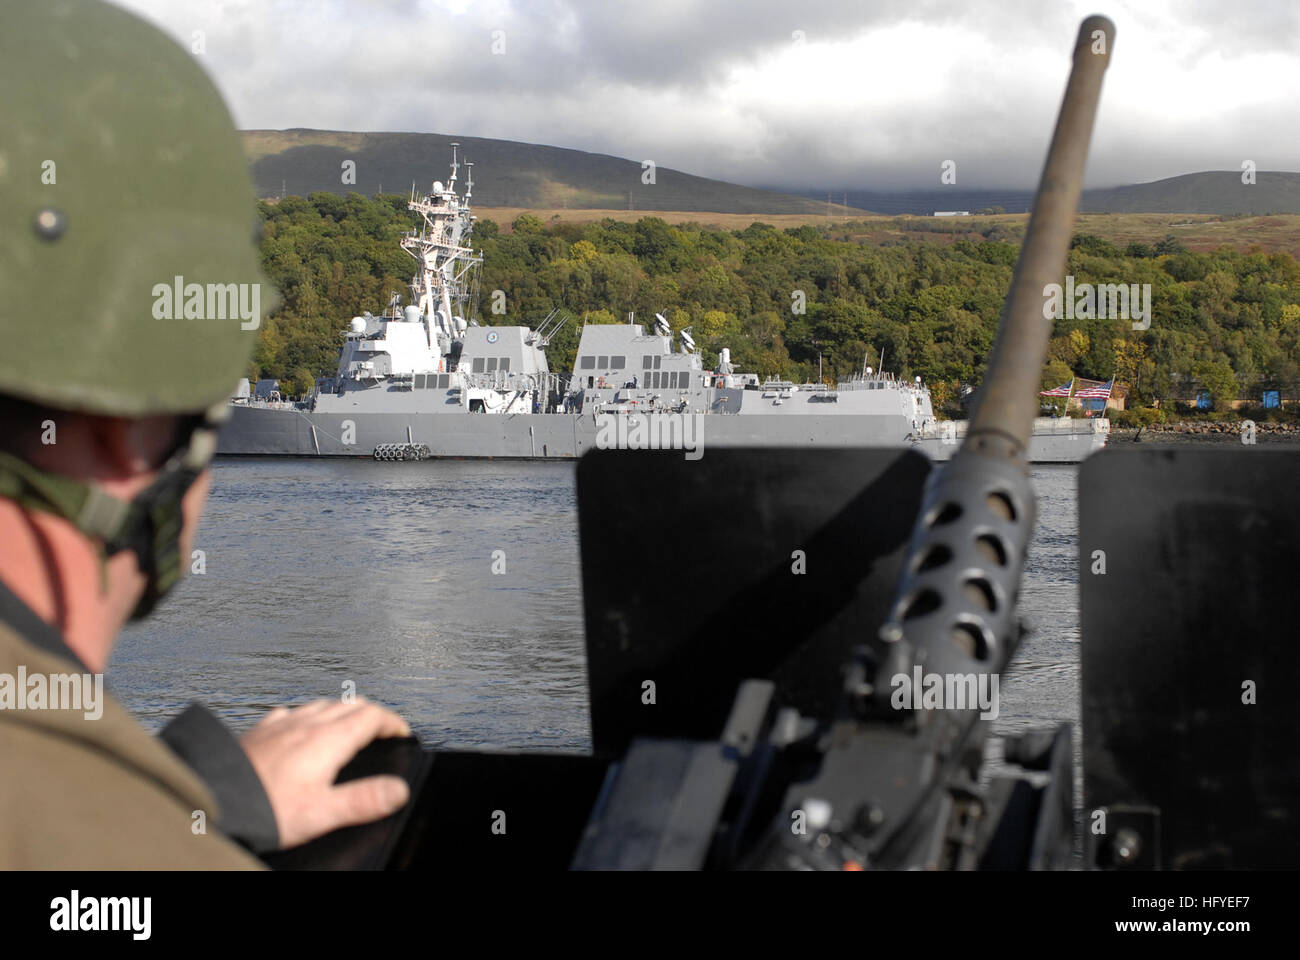 101003-N-5324W-024 FASLANE, Scotland (Oct. 3. 2010) Gunner's Mate 2nd Class Scott Wegmann stands watch at the .50-caliber machine gun mount aboard the guided-missile destroyer USS Stout (DDG 55) as the ship departs Faslane, Scotland to commence Joint Warrior 10-2. The guided-missile destroyers USS Bainbridge (DDG 96) and USS Nitze (DDG 94) are moored in the background. Joint Warrior is a multinational exercise designed to improve interoperability between allied navies and prepares participating crews to conduct combined operations during deployment. (U.S. Navy photo by Mass Communication Speci Stock Photo